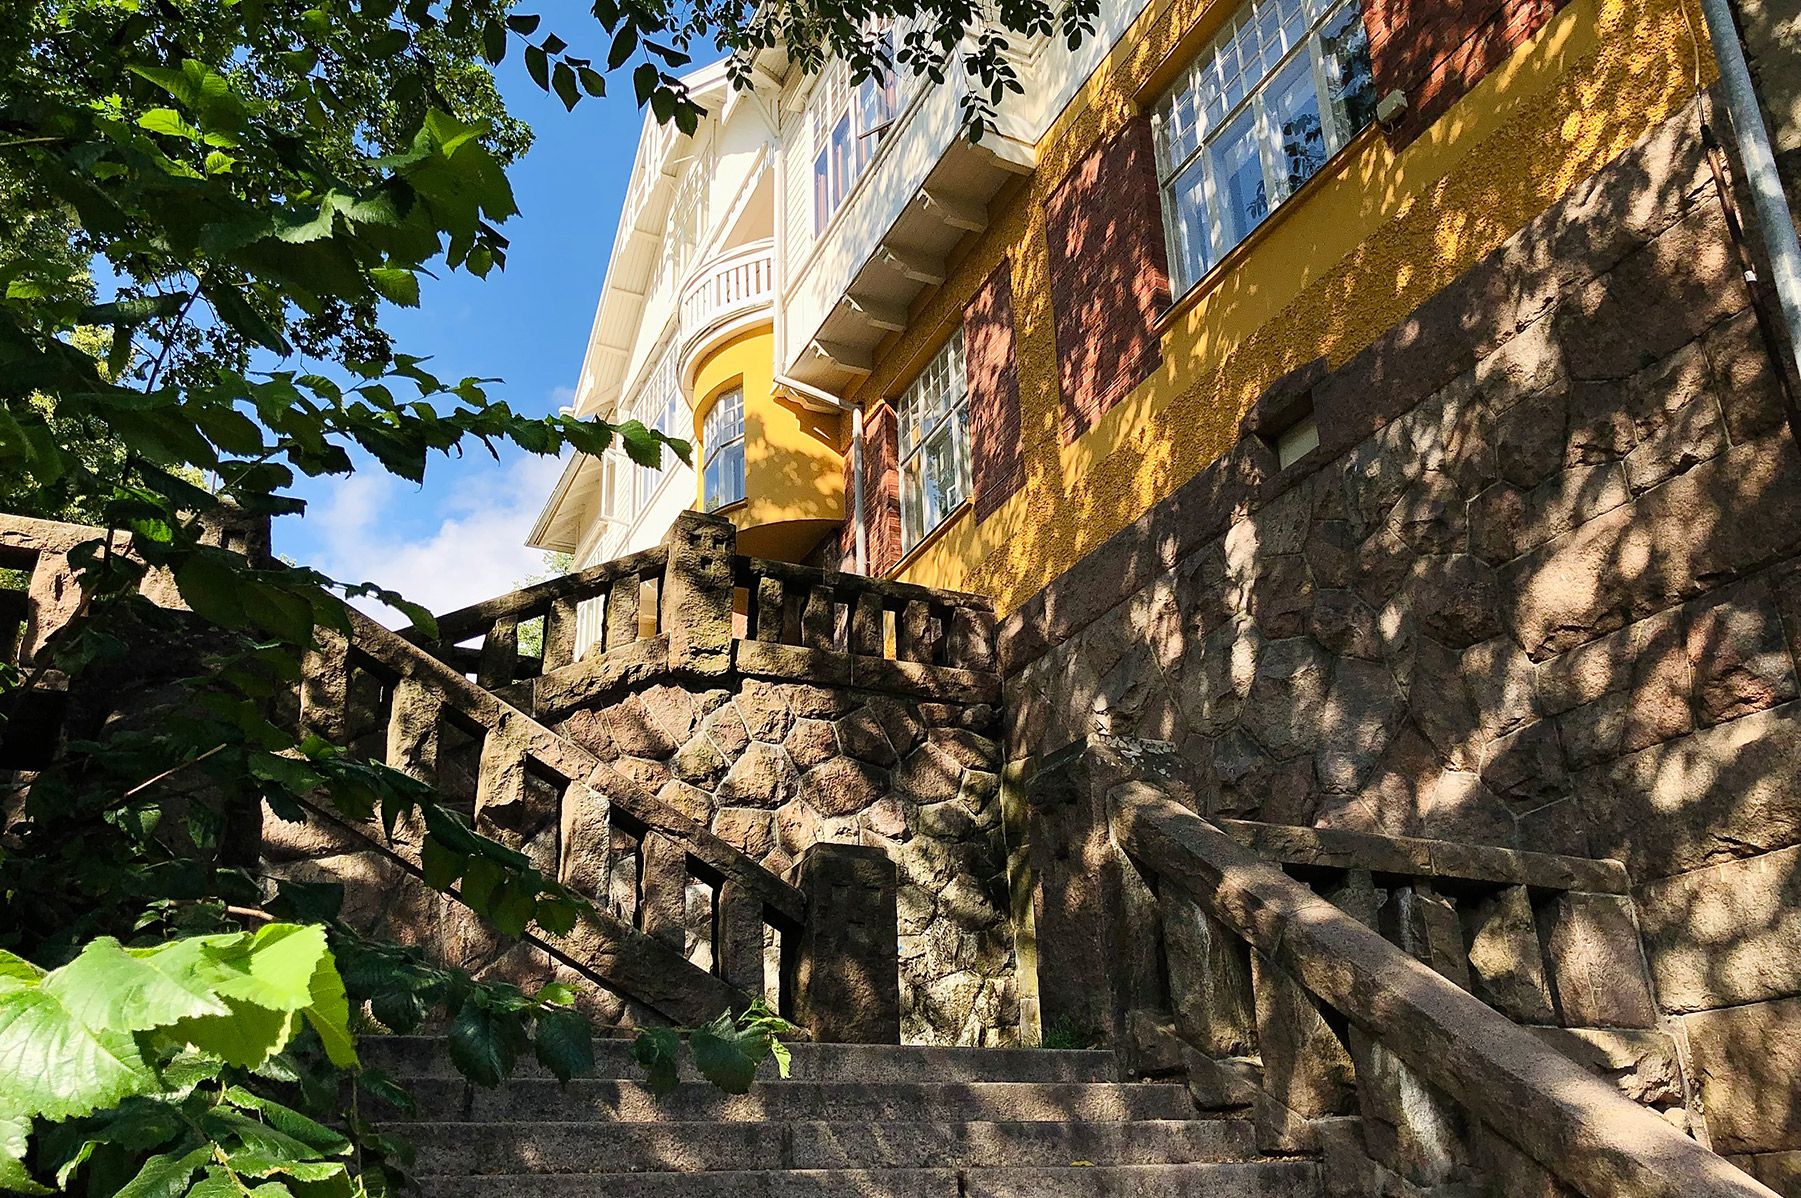 The meandering Muistainveljestenkuja Way stairs in the shade of the trees. At the top of the stairs is a yellow Art Nouveau building.